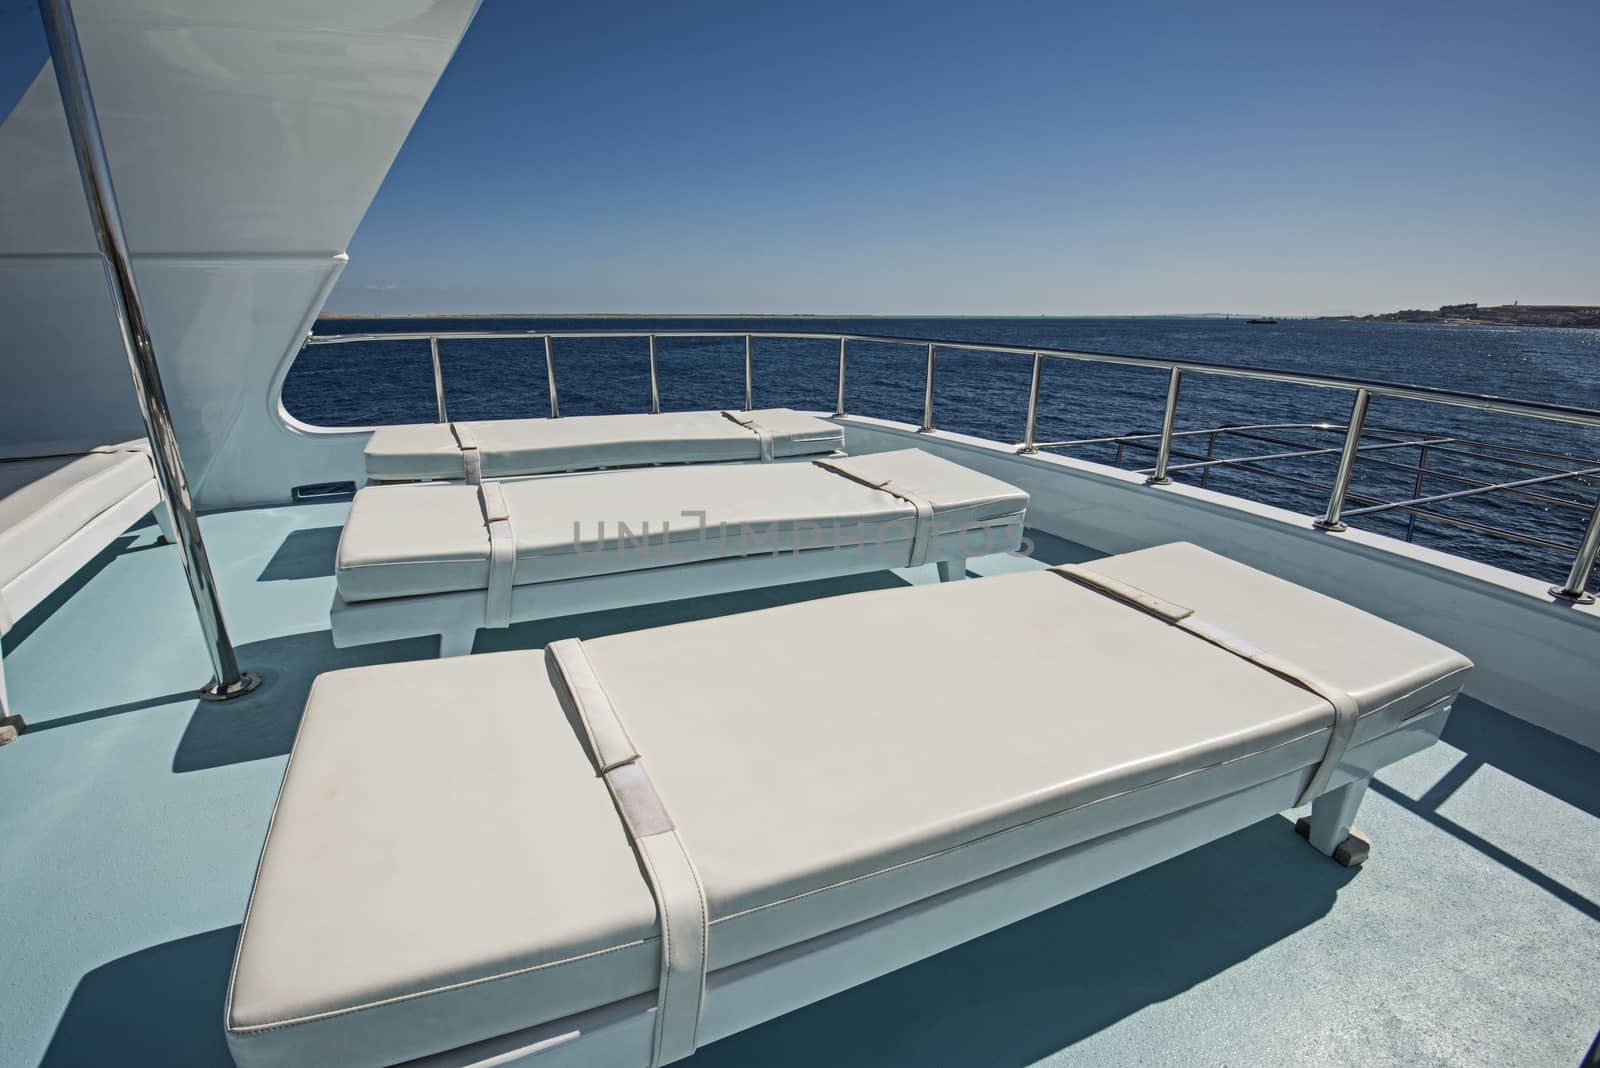 View over the sundeck of a large luxury motor yacht on tropical open ocean with sun loungers